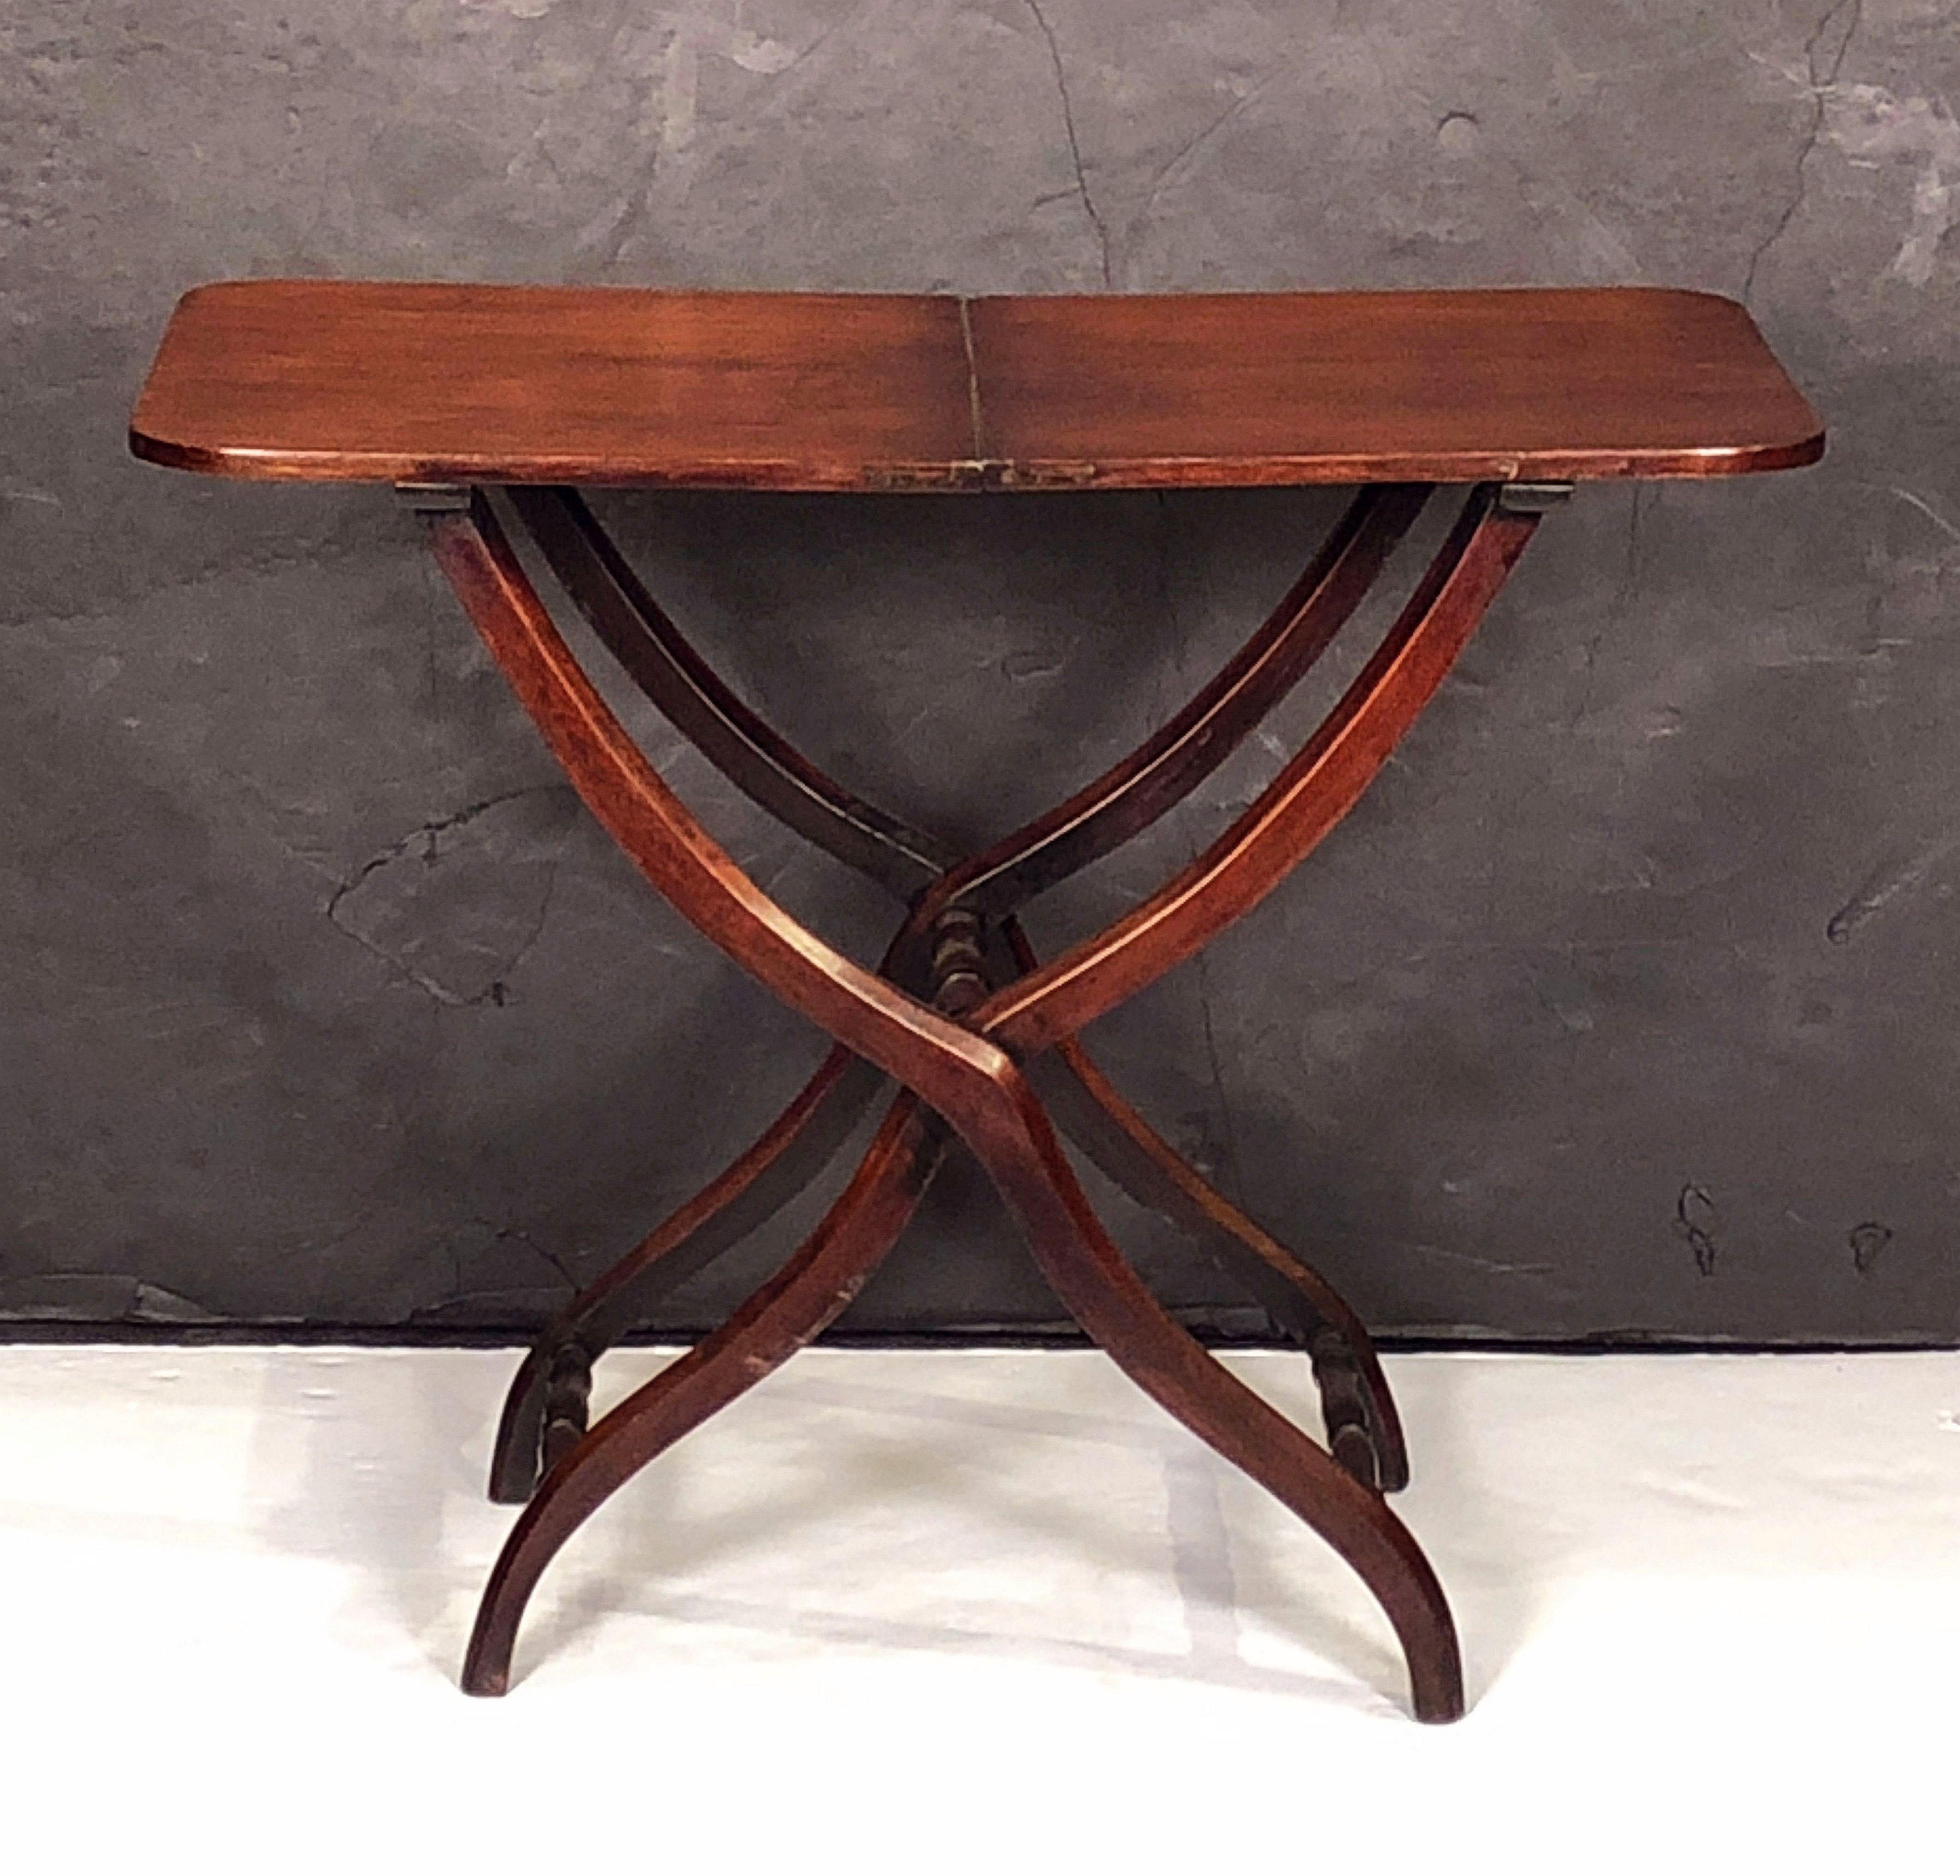 A fine 19th century English coaching or field table (folding) of mahogany featuring elegant serpentine-shaped turning for the supports, with brass hinges and a handsome patina to the wood.

Such tables were used in the age of carriages or coaches